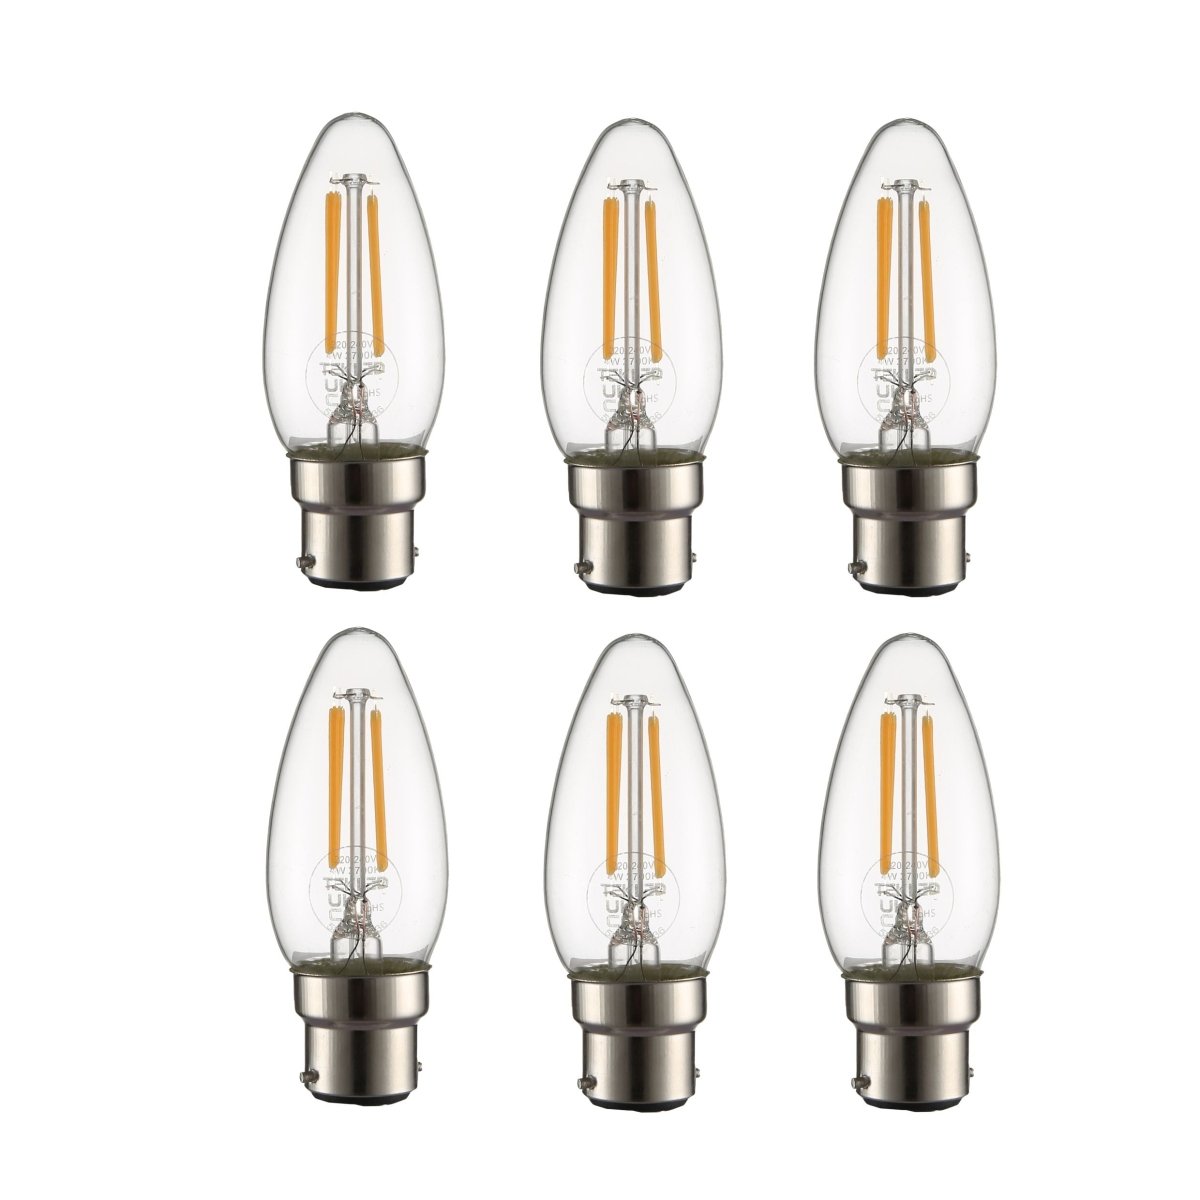 Main image of LED Dimmable Filament Bulb C35 Candle B22 Bayonet Cap 4W 470lm Warm White 2700K Clear Pack of 6 | TEKLED 583-150636